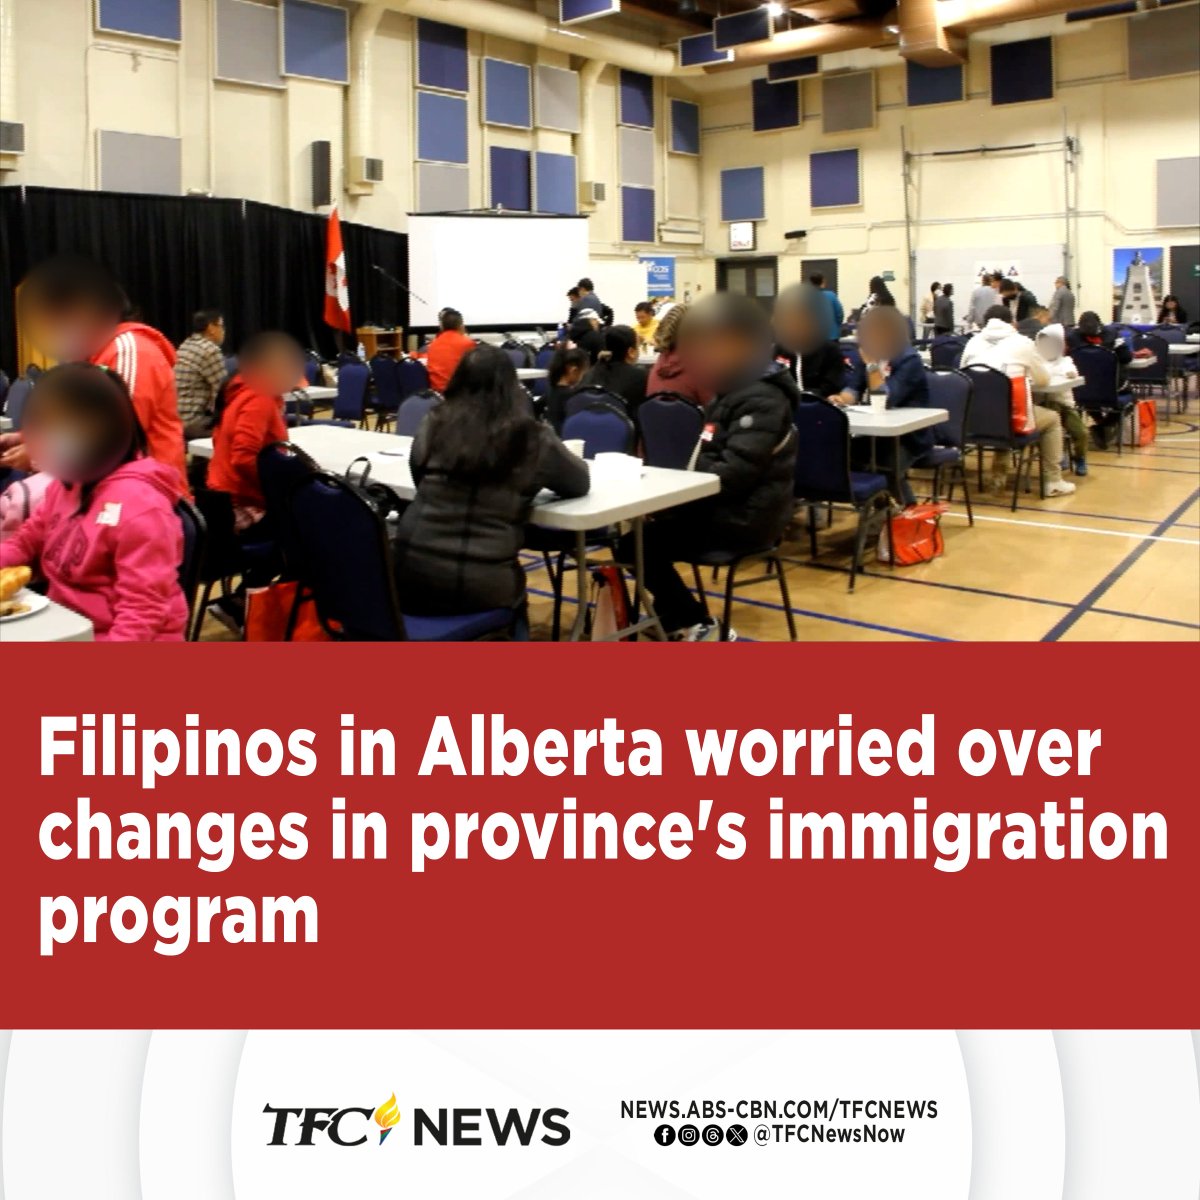 Filipinos in Alberta are growing concerned that their application for permanent residency may be put in limbo due to changes in the province's immigration program.

Marjorie Carmona-Newman tells us more. #TFCNews

WATCH: youtu.be/Ts1zc2y74ro